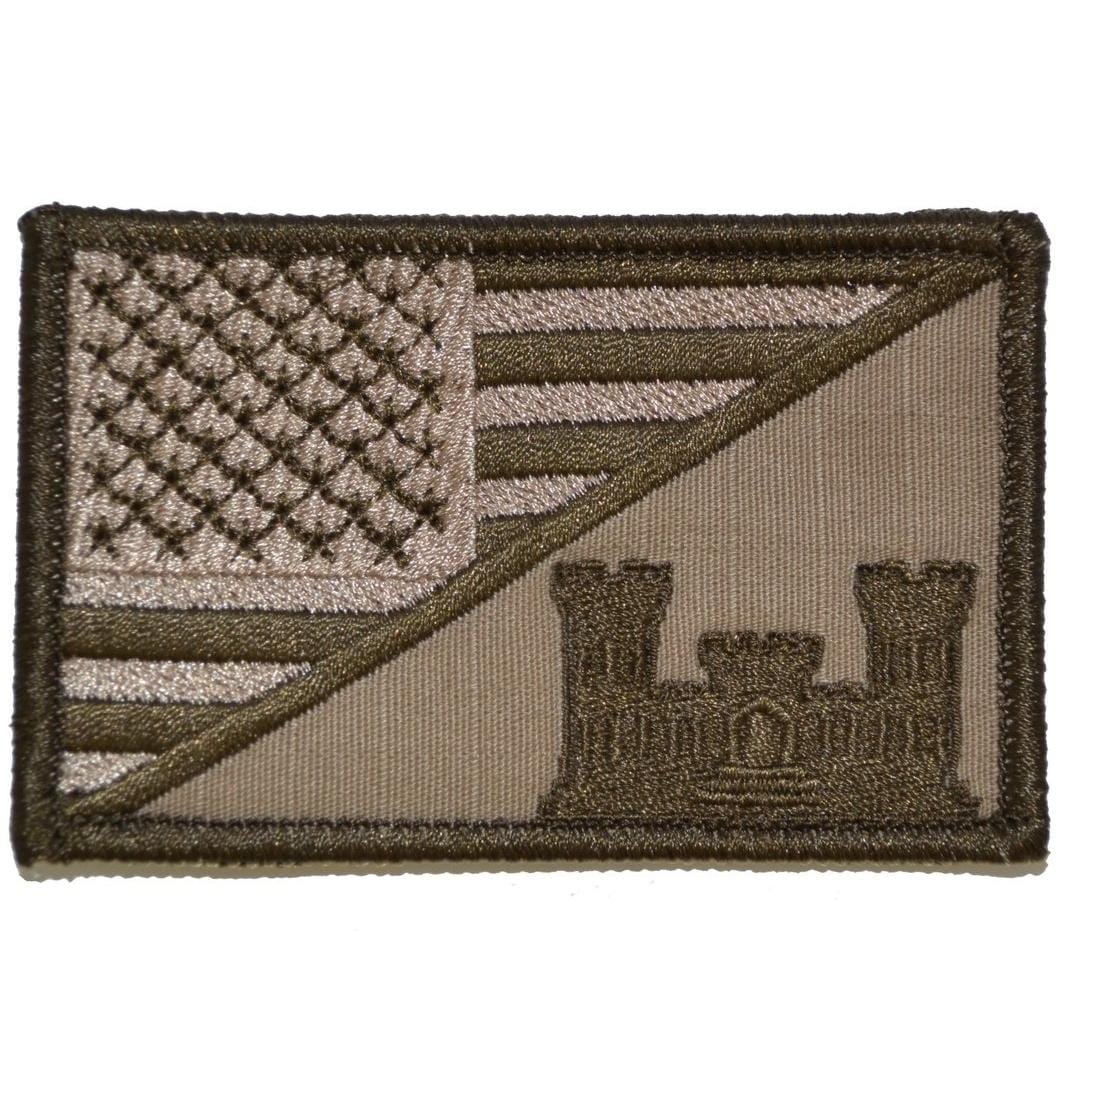 Tactical Gear Junkie Patches Coyote Brown Army Engineer Castle USA Flag - 2.25x3.5 Patch